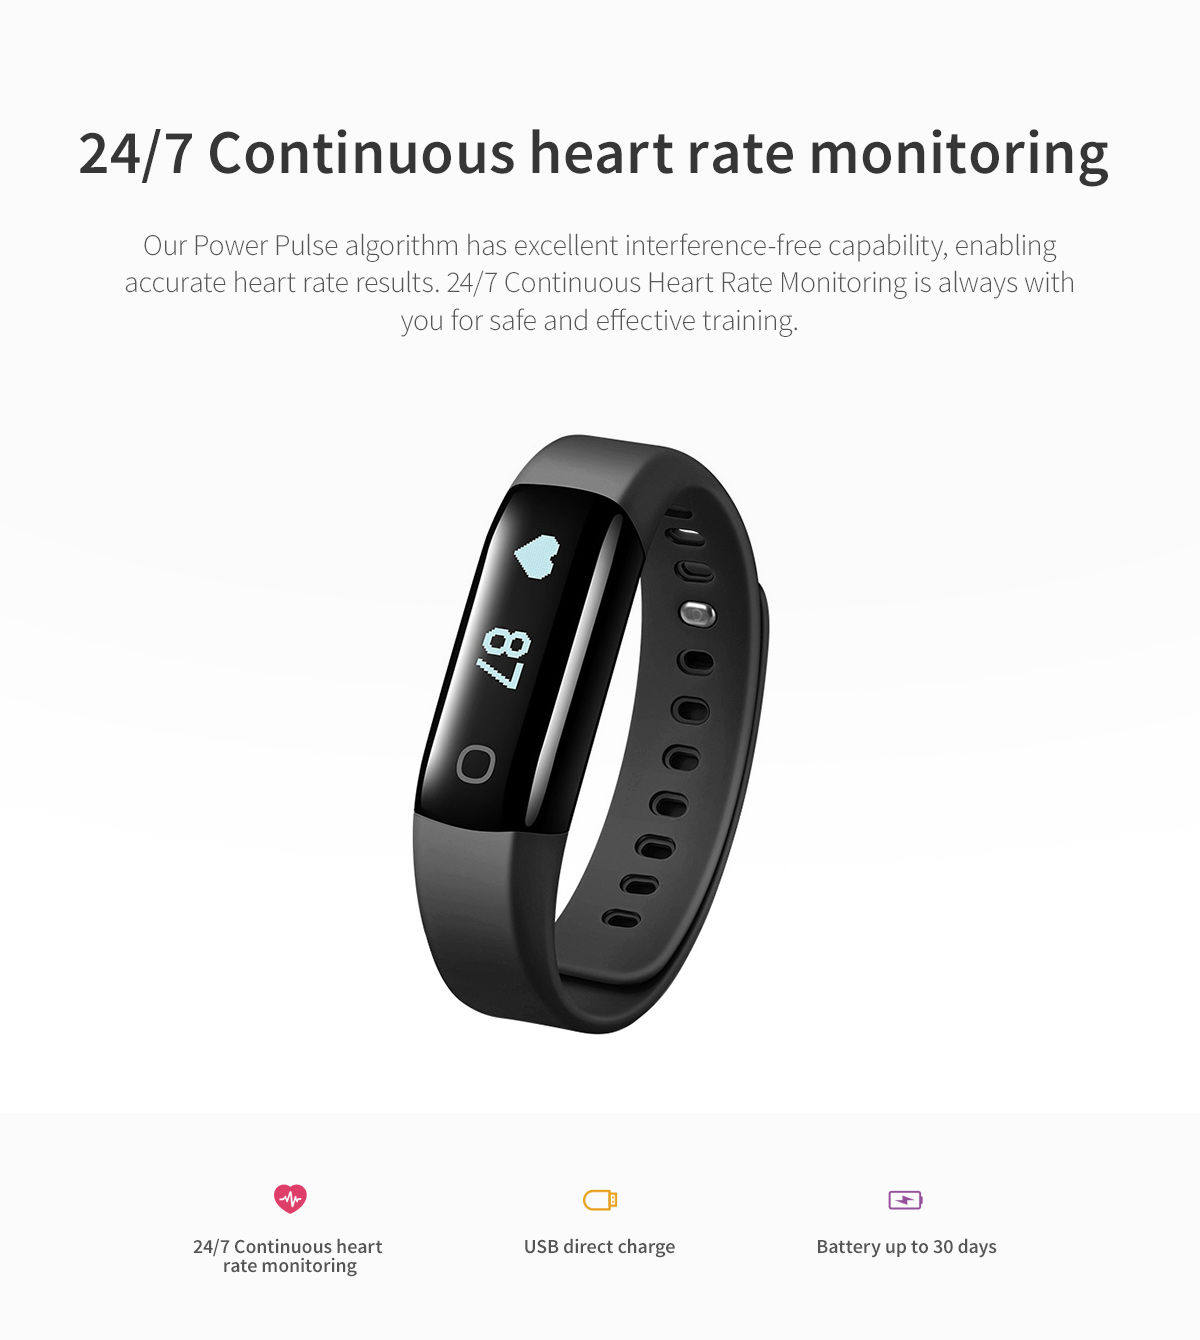  Huawei Band 2 Pro All-in-One Activity Tracker Smart Fitness  Wristband, GPS, Multi-Sport Mode, Heart Rate, Sleep Monitor